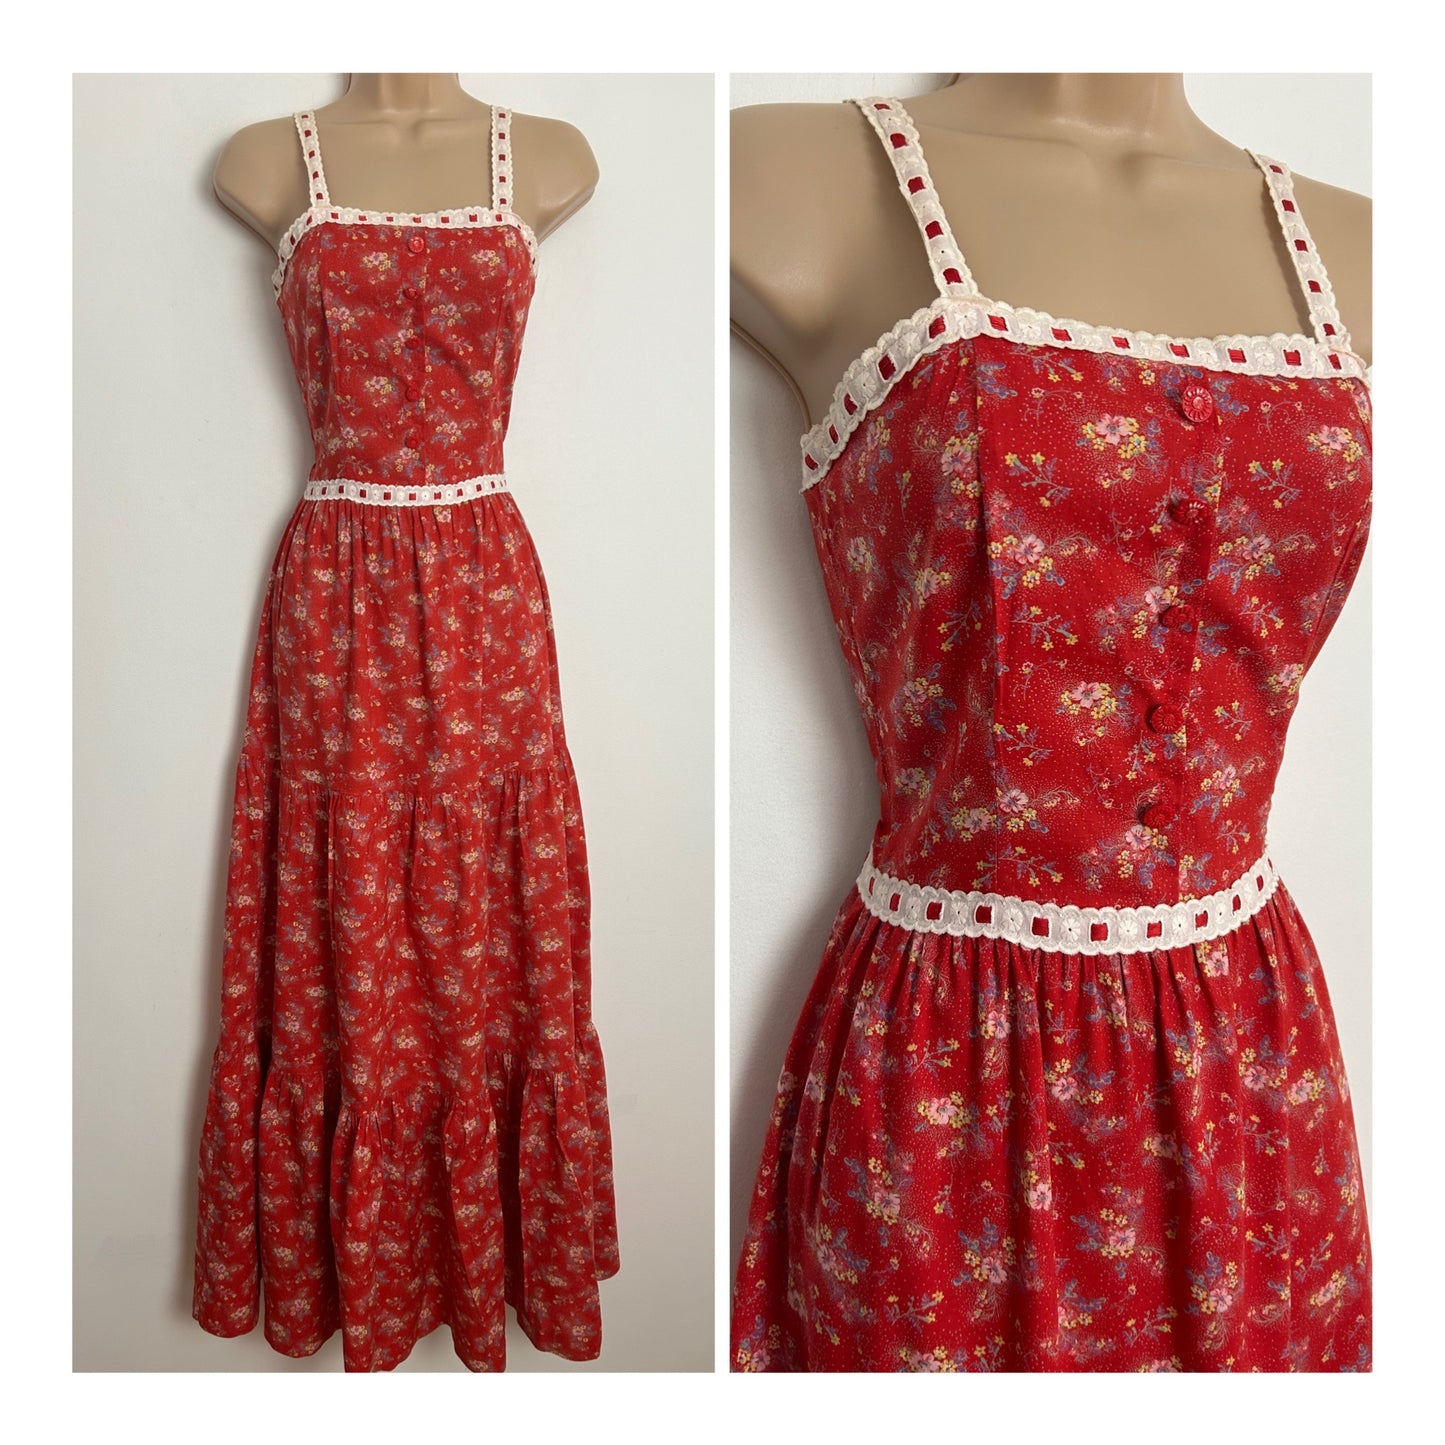 Vintage 1970s ABOUT NICK UK Size 4-6 Pretty Red Ditsy Floral Print Lace Trim 100% cotton Summer Prairie Maxi Dress